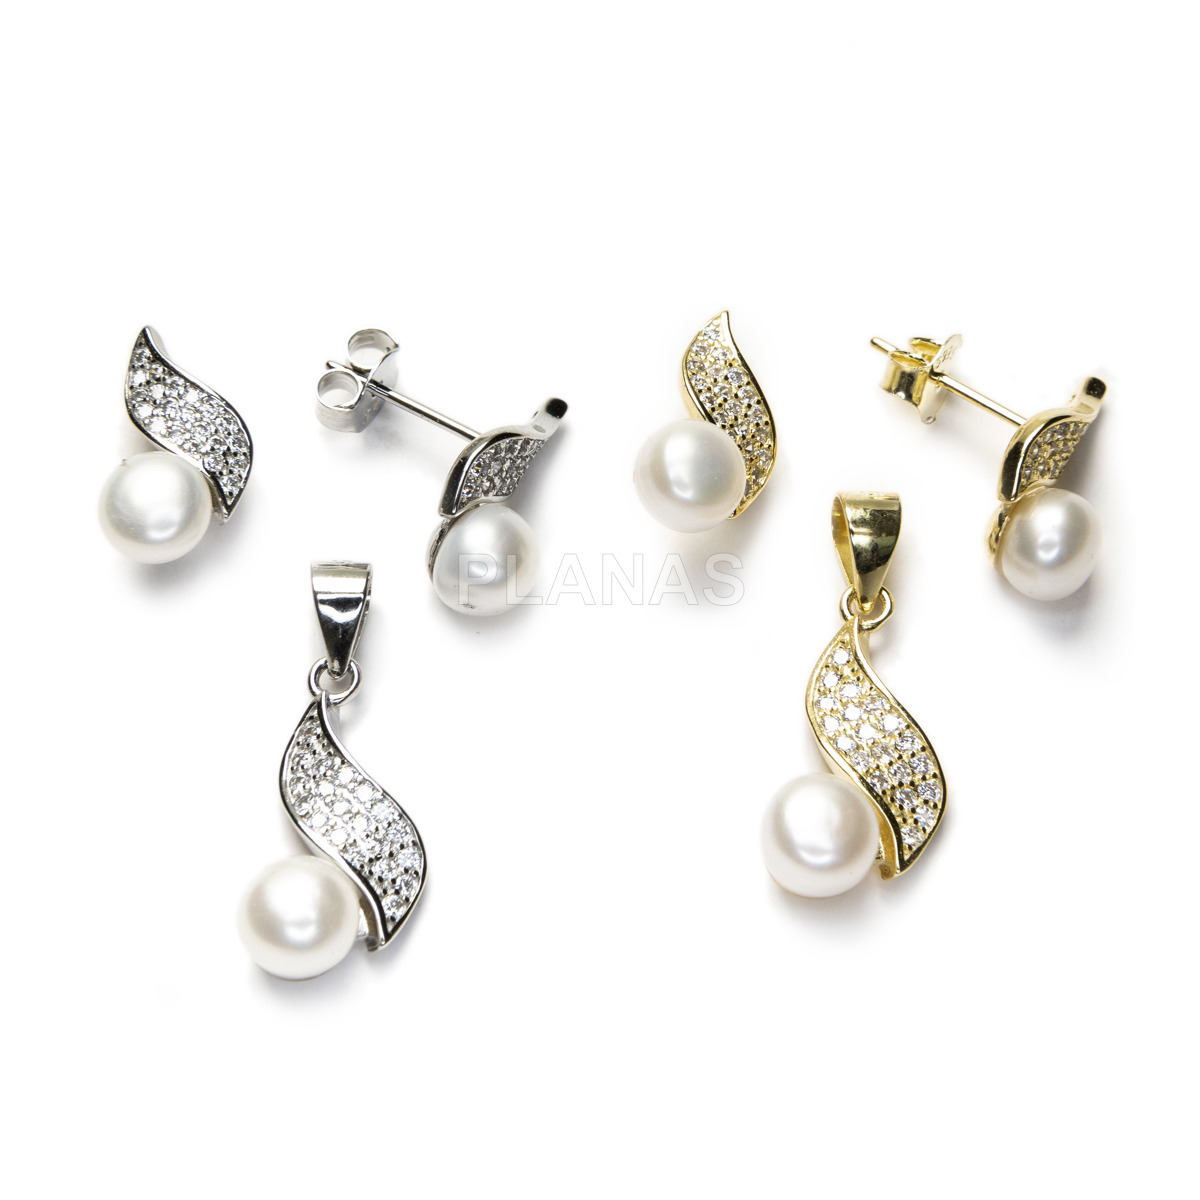 Rhodium-plated sterling silver and zirconia set with cultured pearl.